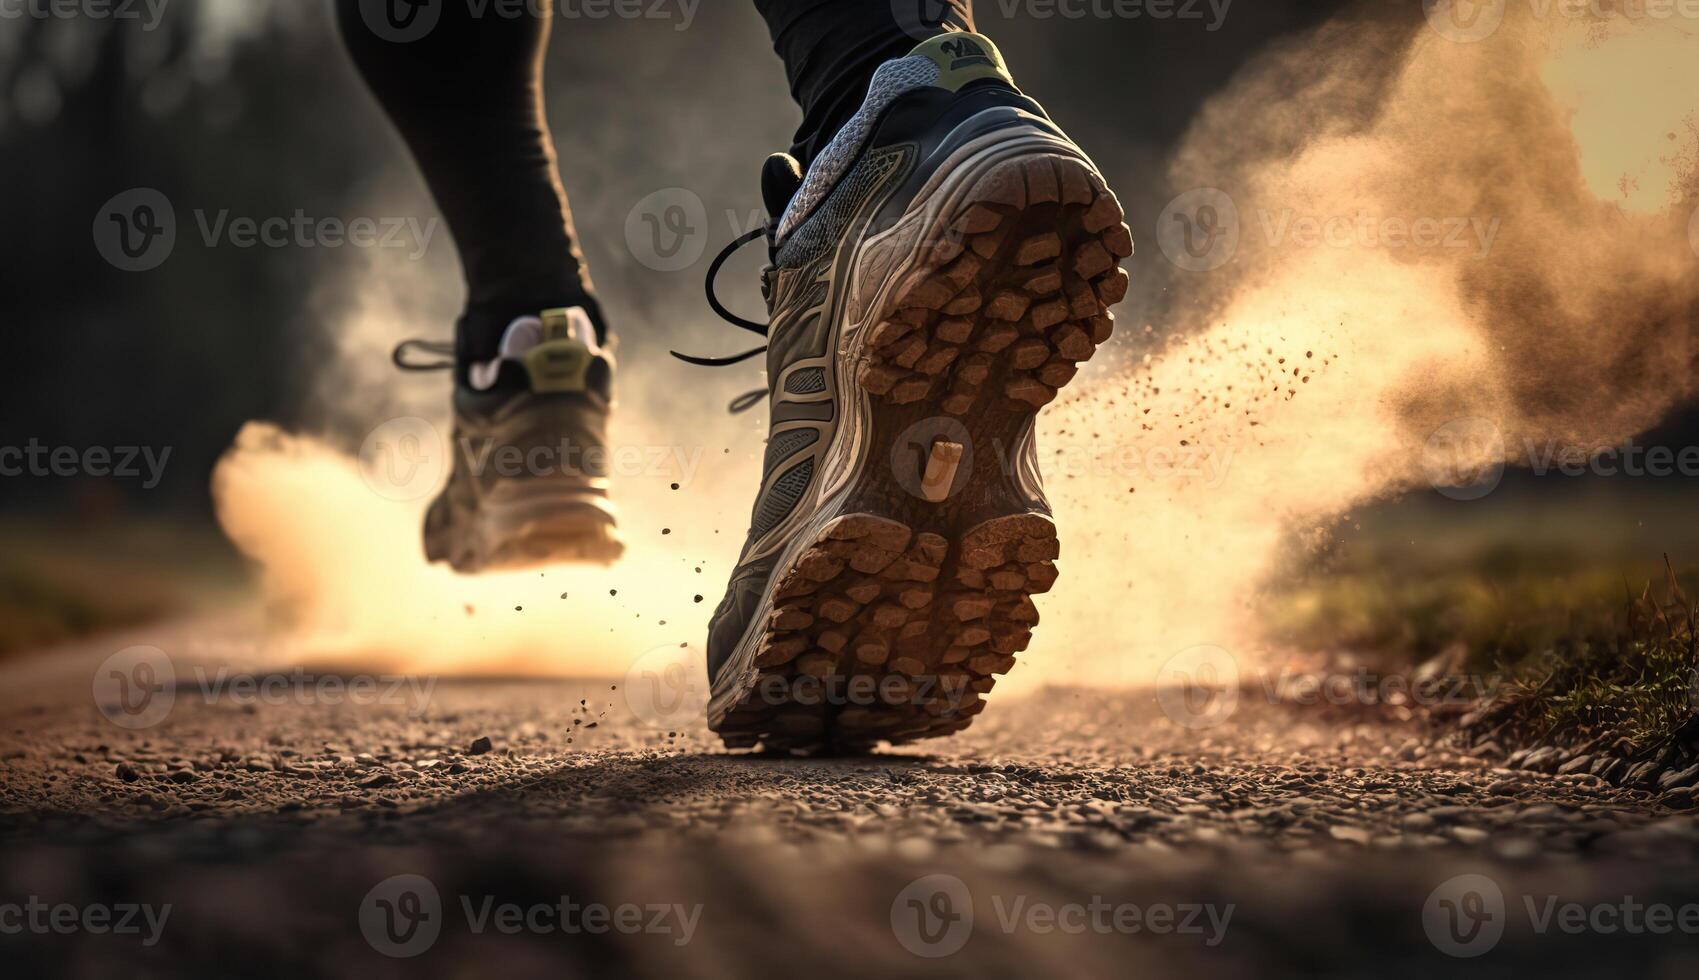 . . Photo shot realistic of running jogging walking person in the urban city park. Outdoor adventure sport vibe. Graphic Art